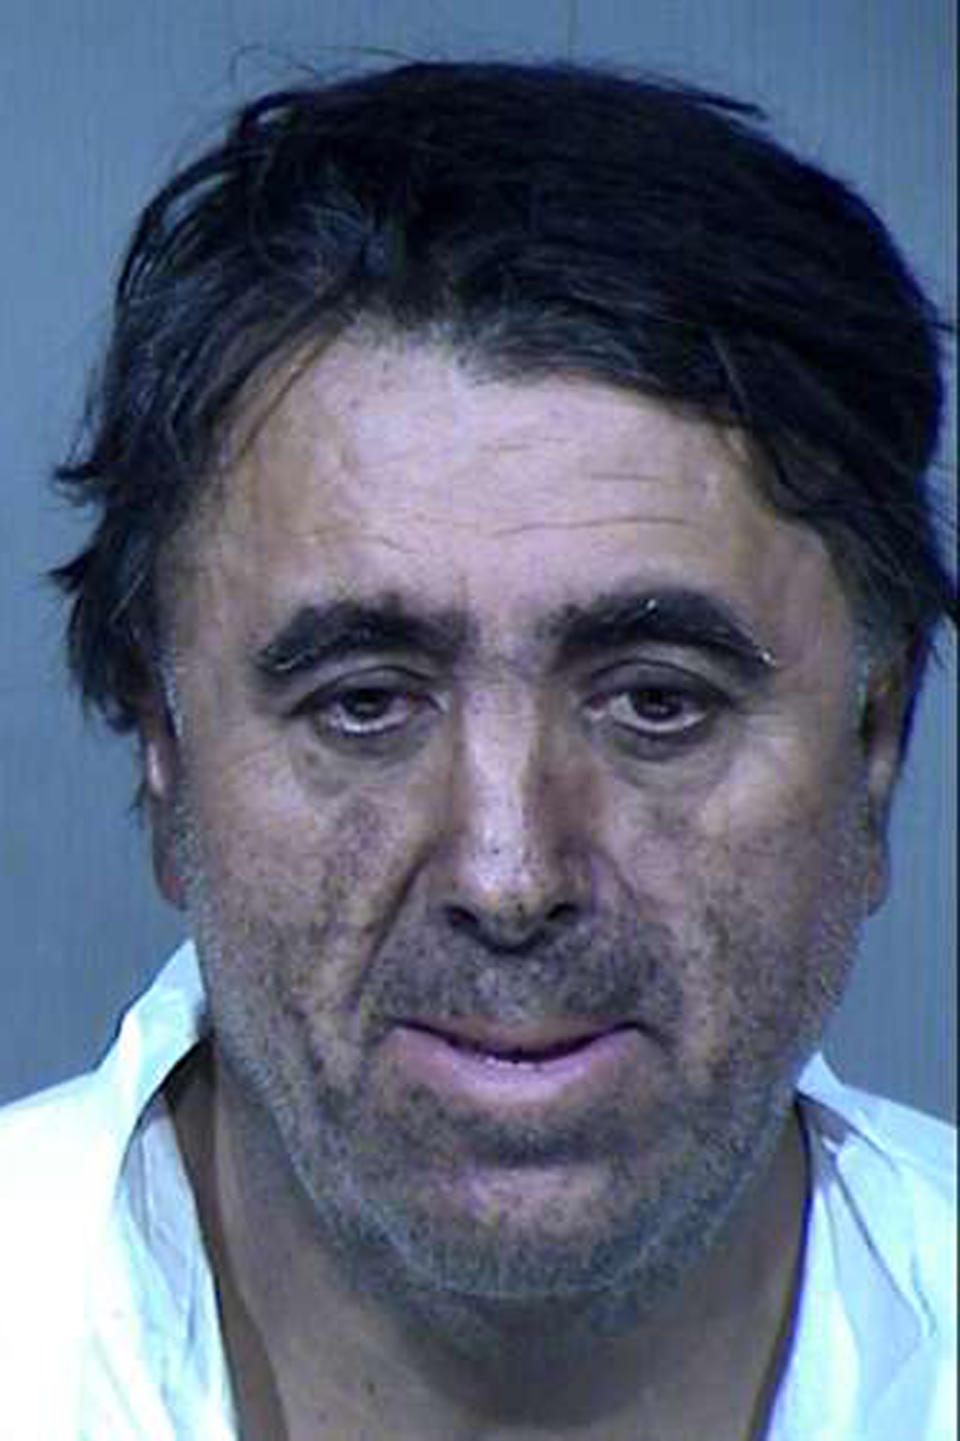 This undated booking photo provided by the Maricopa County Sheriff's Office shows 56-year-old Rafael Loera. Loera and his wife, 50-year-old Maribel Loera, are accused of intentionally setting their west Phoenix home ablaze after their children were taken by the state, leading firefighters to find unidentified skeletal remains. They have been booked on suspicion of arson, child abuse and concealment of a dead body. Authorities haven't determined whether the remains belong to a child or adult. (Maricopa County Sheriff's Office via AP)